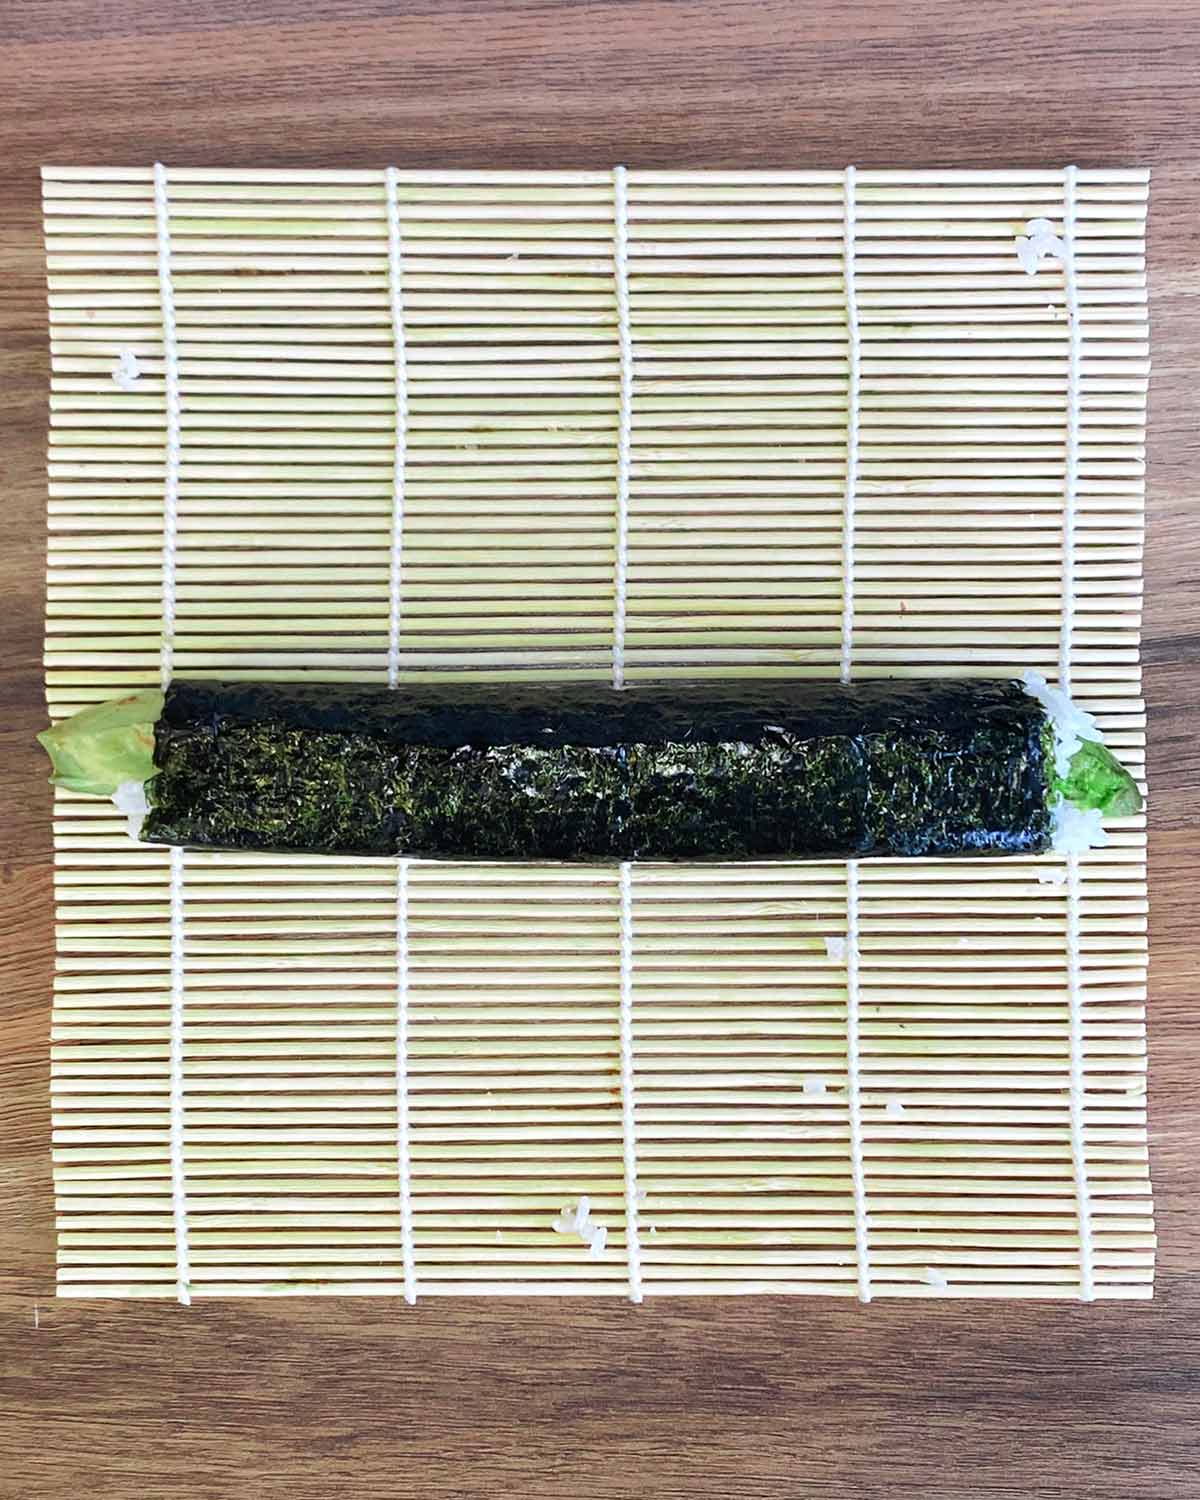 A full sushi roll on a bamboo mat.